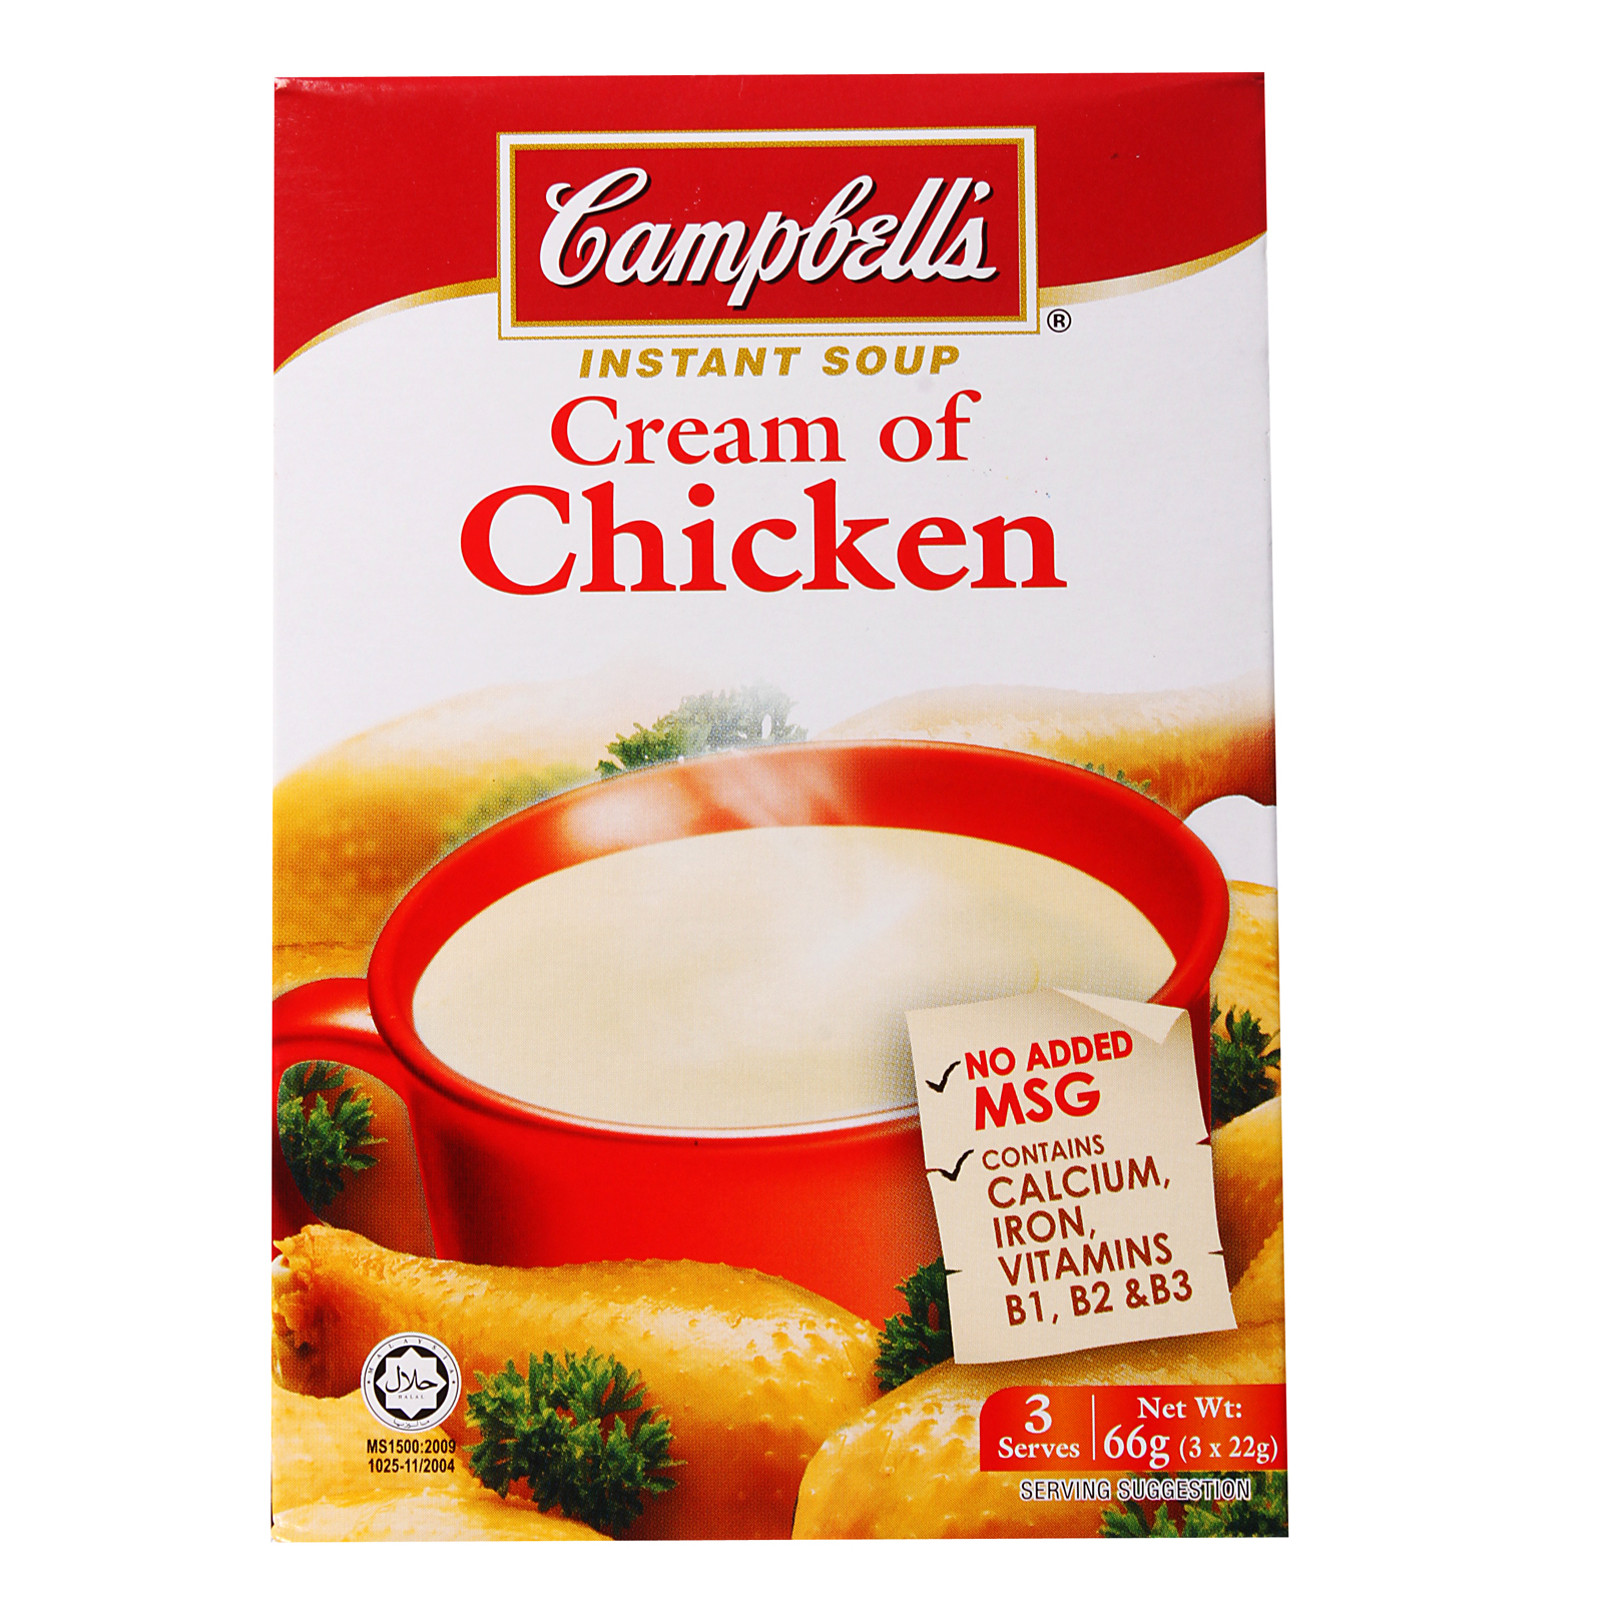 Campbell Mushroom Soup Chicken
 Campbell s Cream of Chicken Instant Soup 22g from RedMart